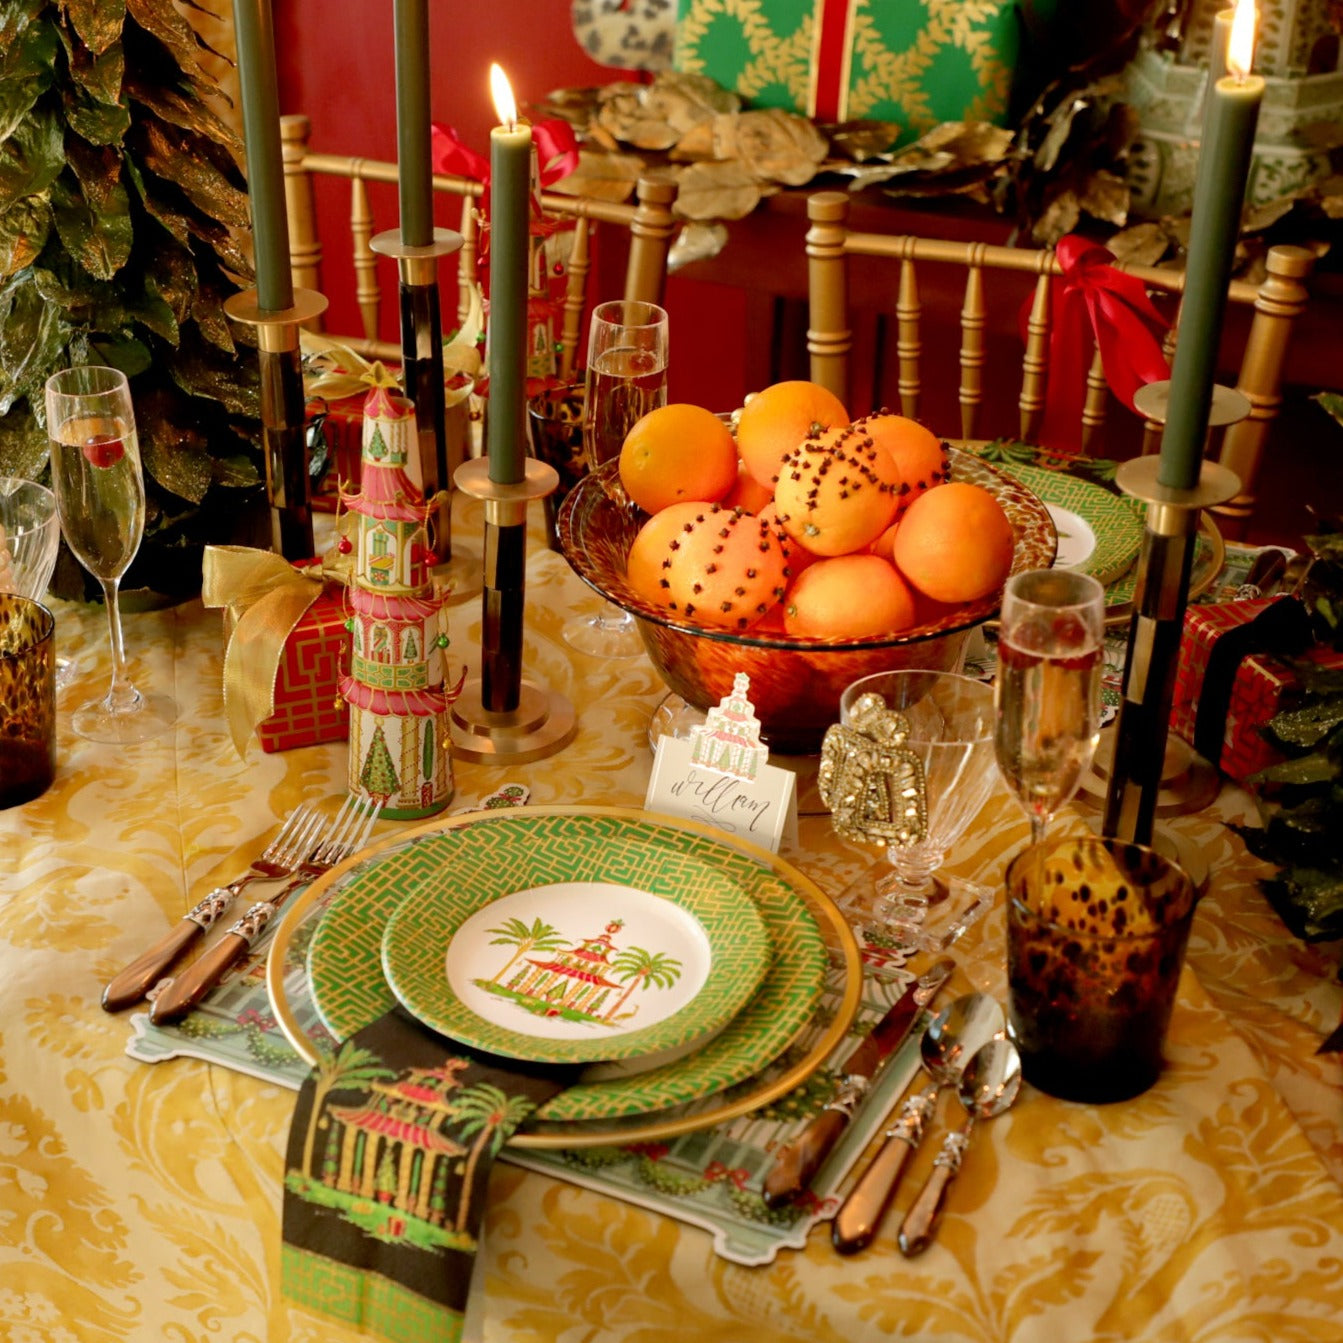 Christmas table scene showing pagoda design paper plates, place card and other Christmas table decorations